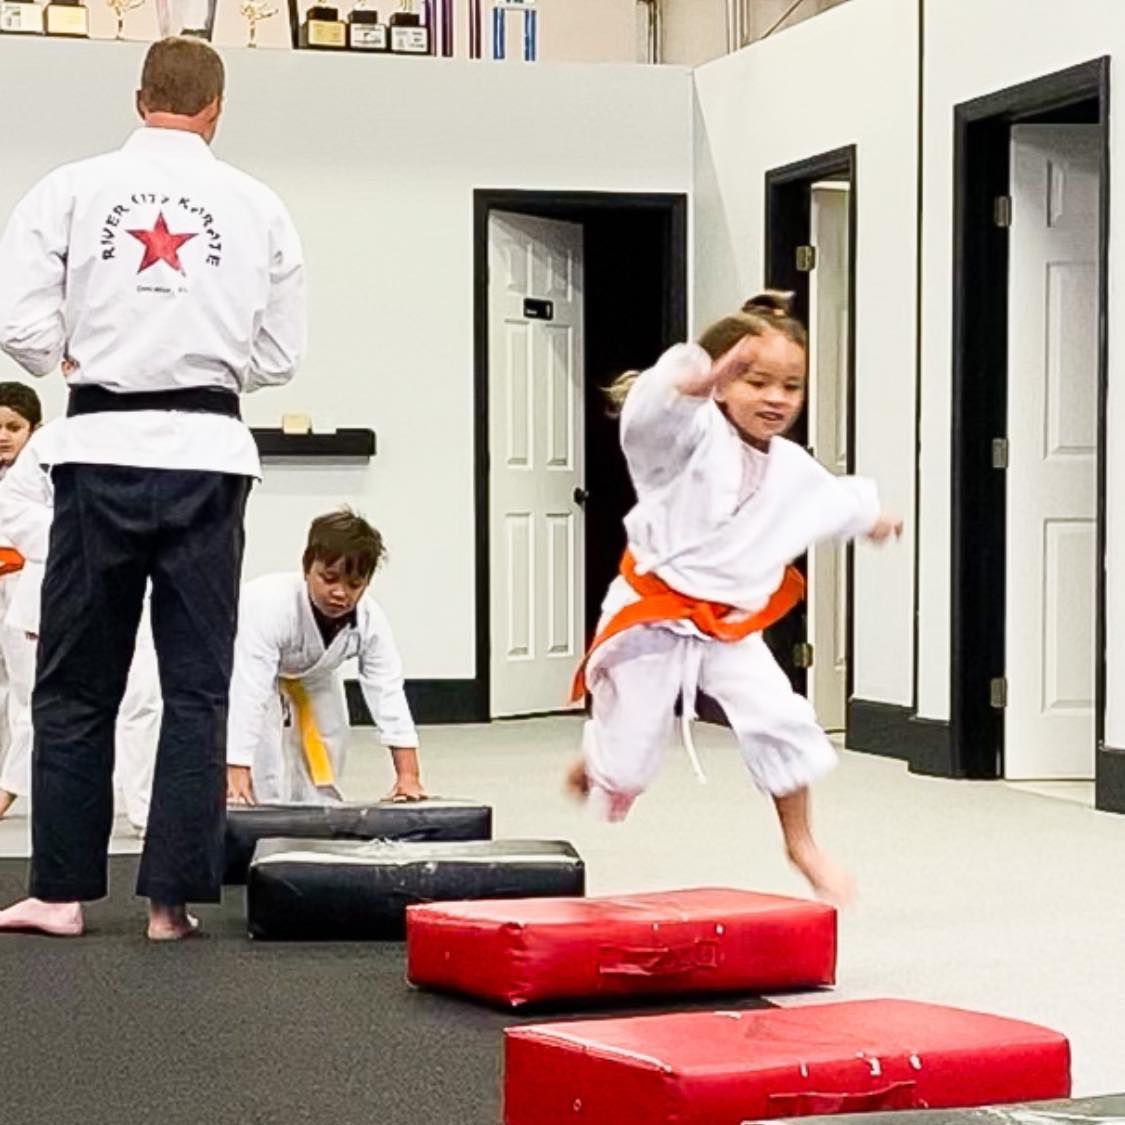 a man in a white karate uniform with a star on the back is watching a little girl jump over red blocks